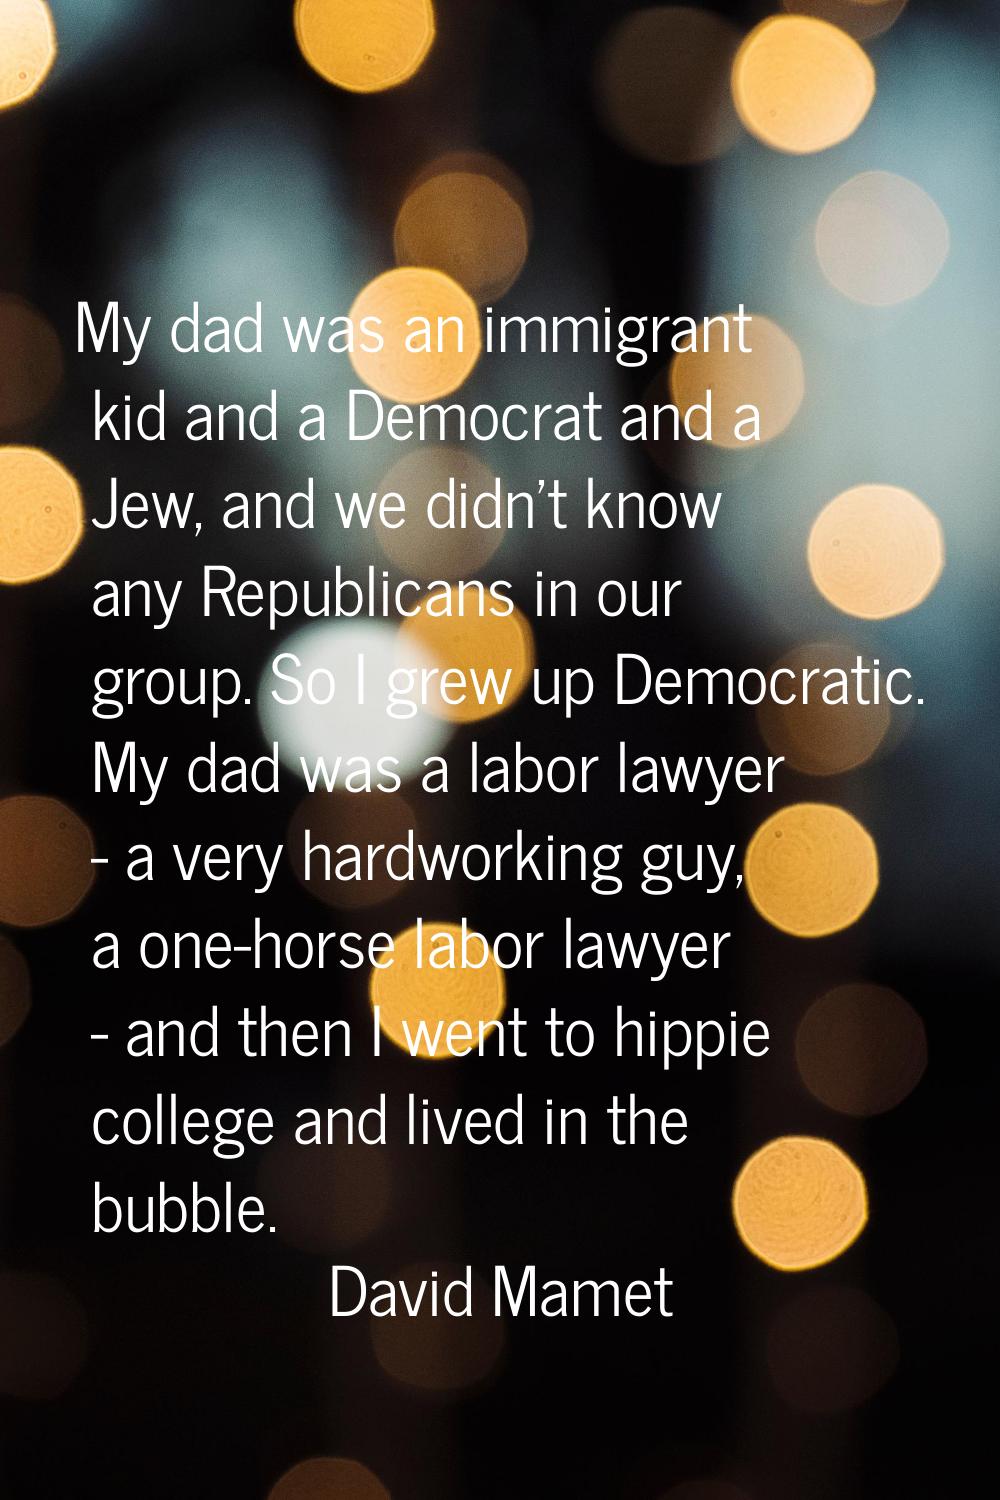 My dad was an immigrant kid and a Democrat and a Jew, and we didn't know any Republicans in our gro